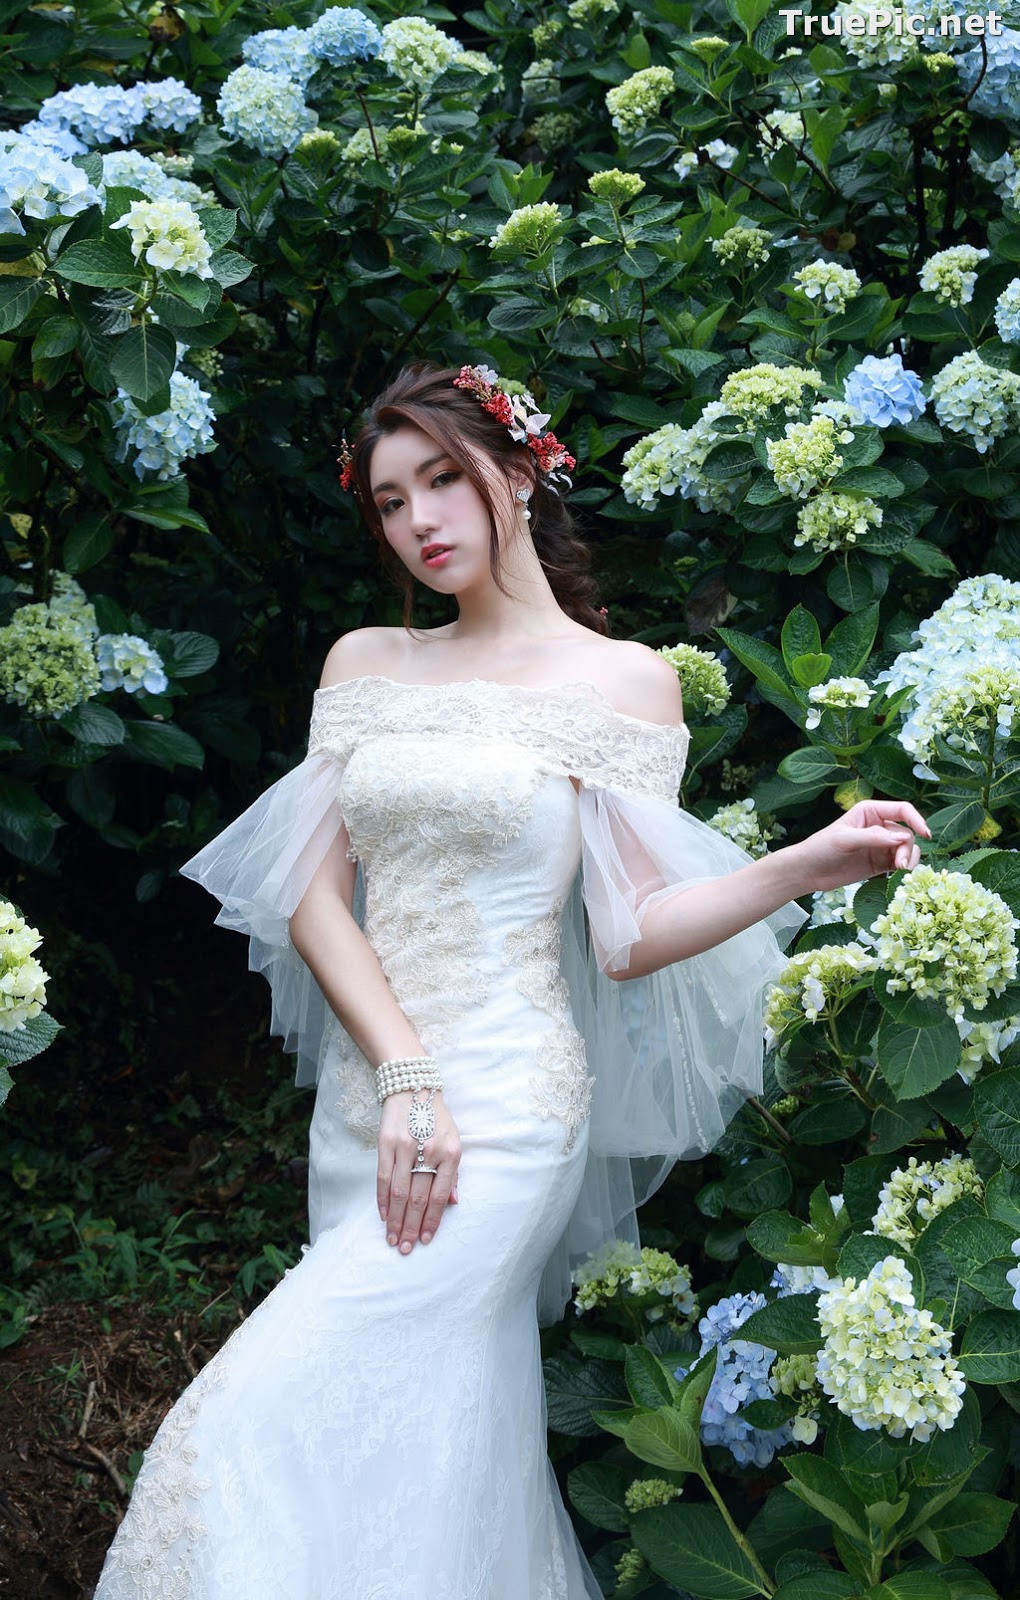 Image Taiwanese Model - 張倫甄 - Beautiful Bride and Hydrangea Flowers - TruePic.net - Picture-14